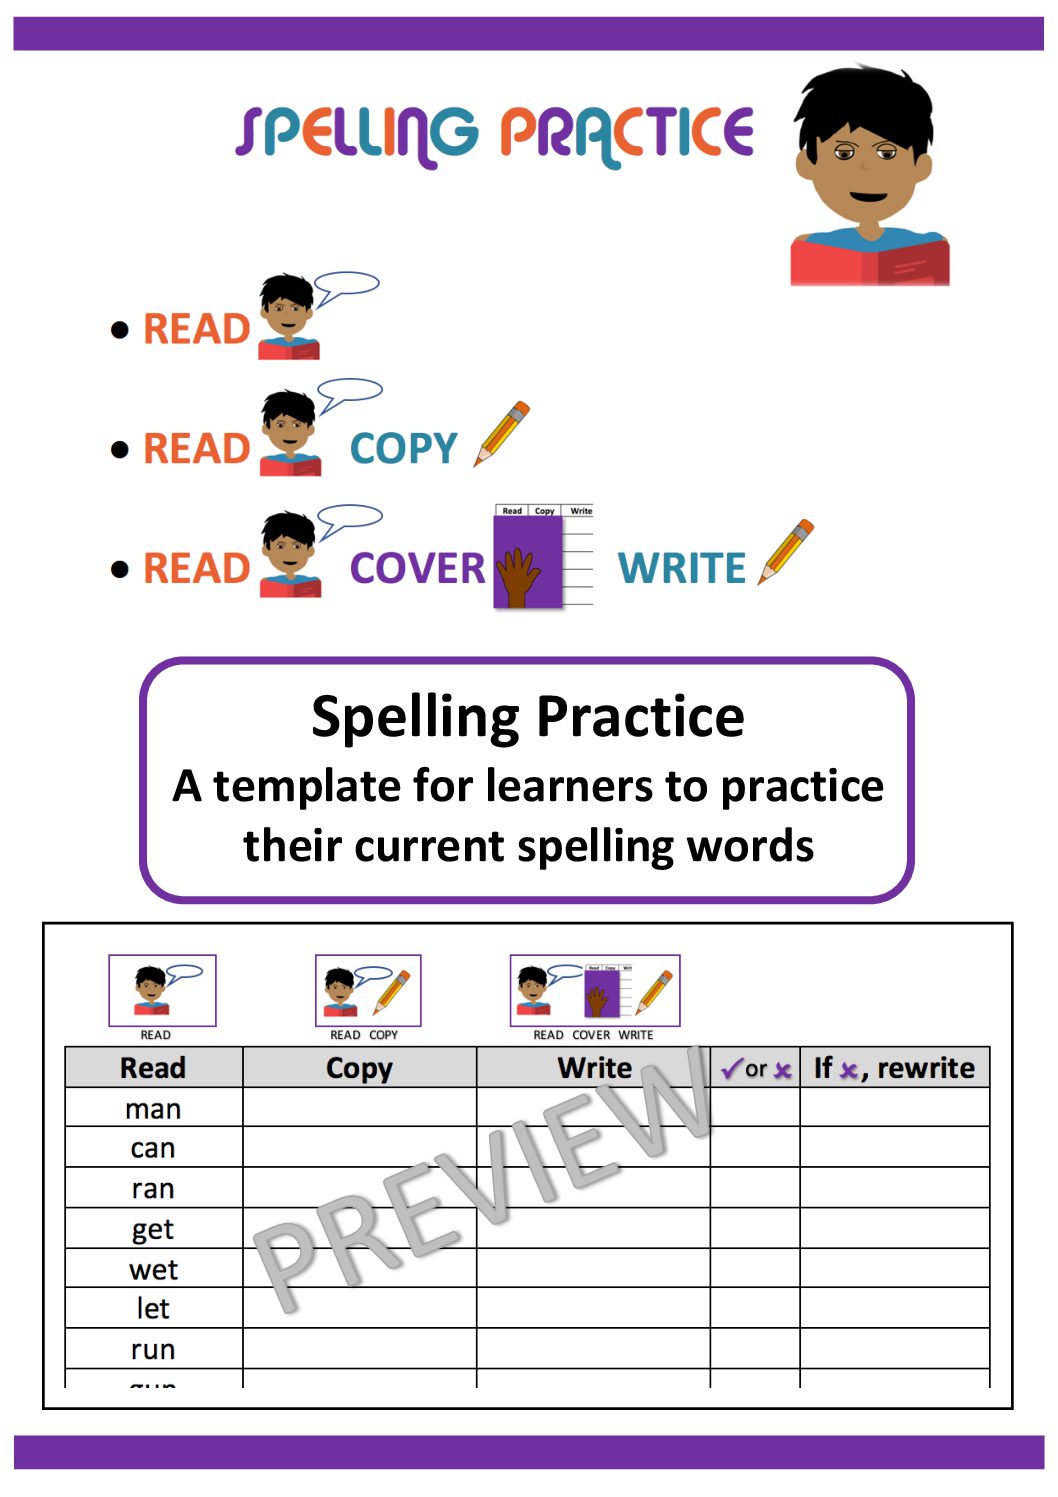 Easy to use spelling practice template • Teacha